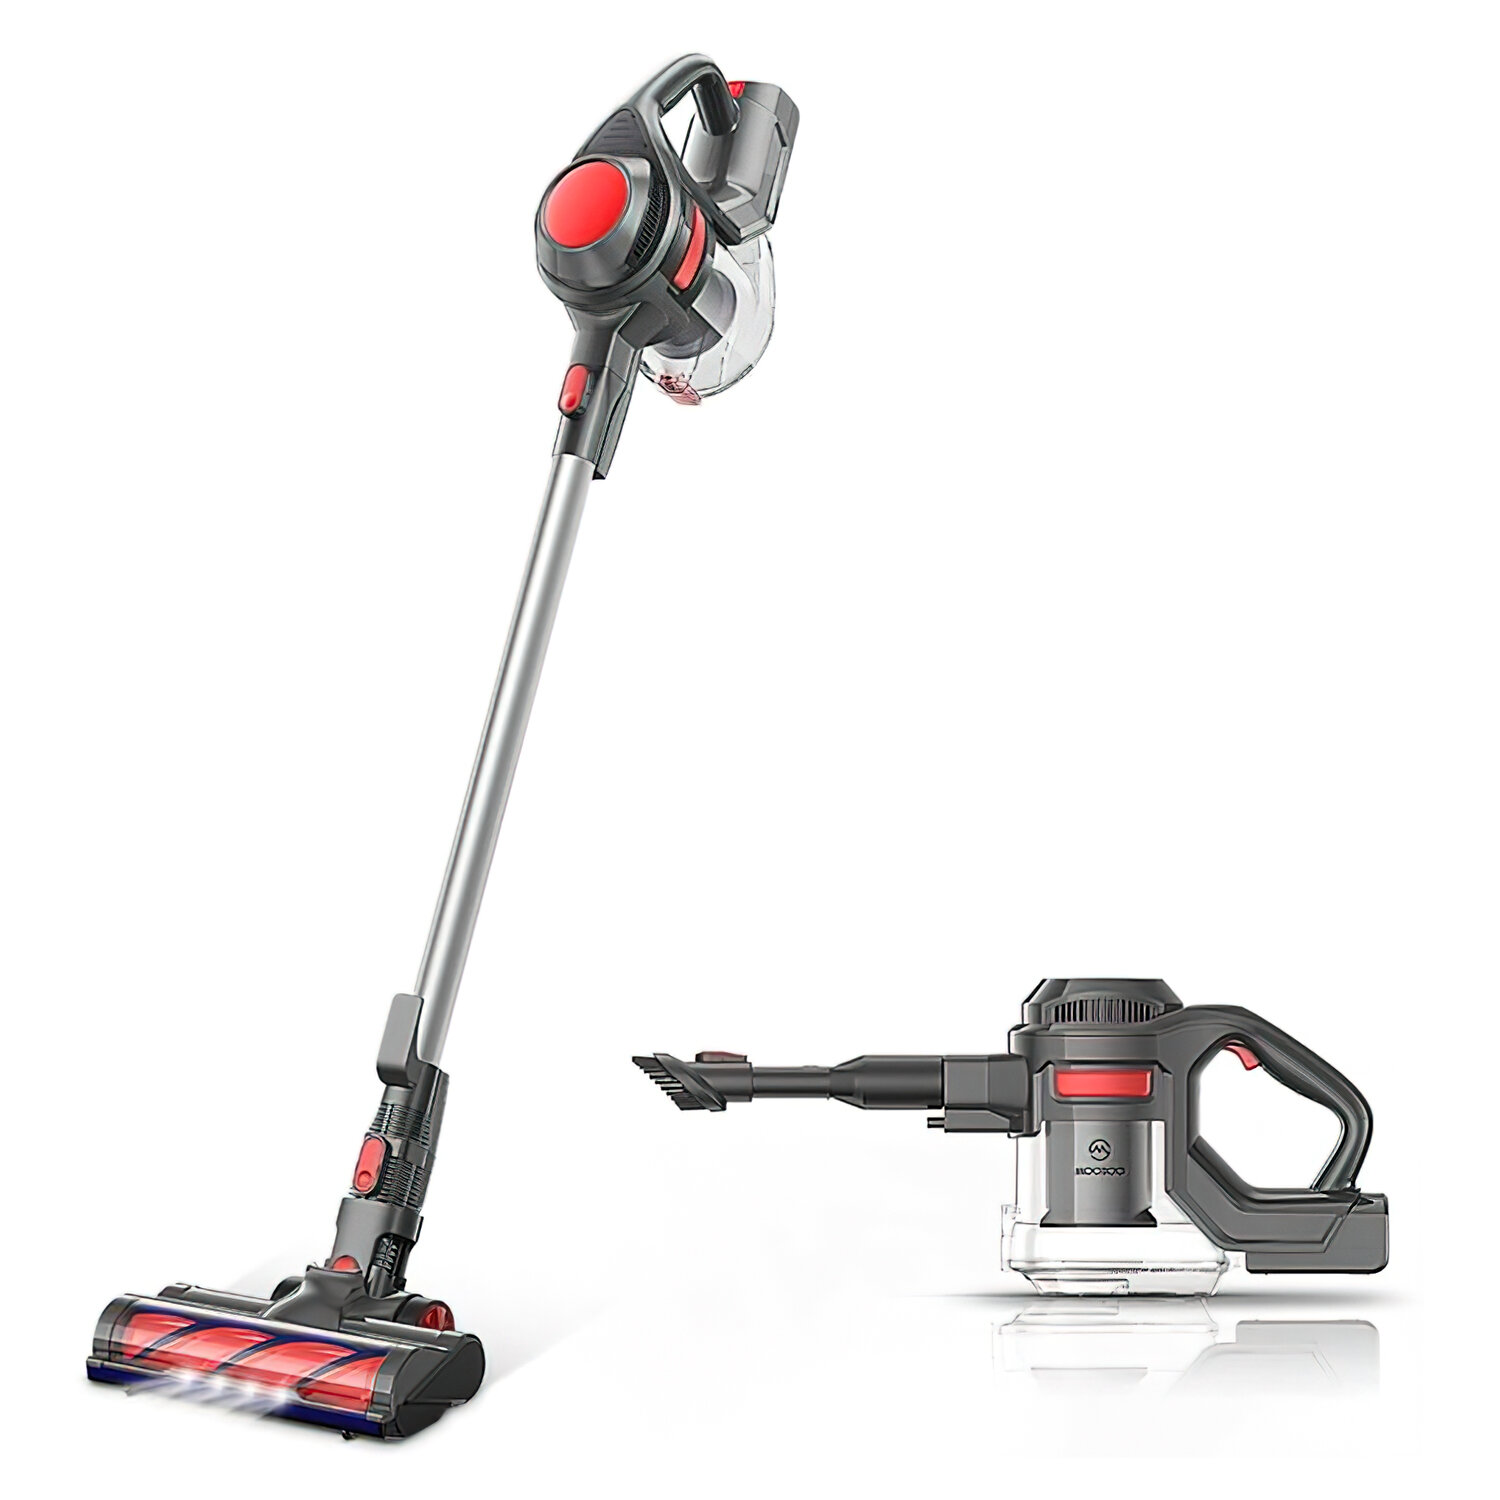 Beldray Cordless Wet & Dry Handheld Lightweight Compact Cleaning Vacuum Cleaner